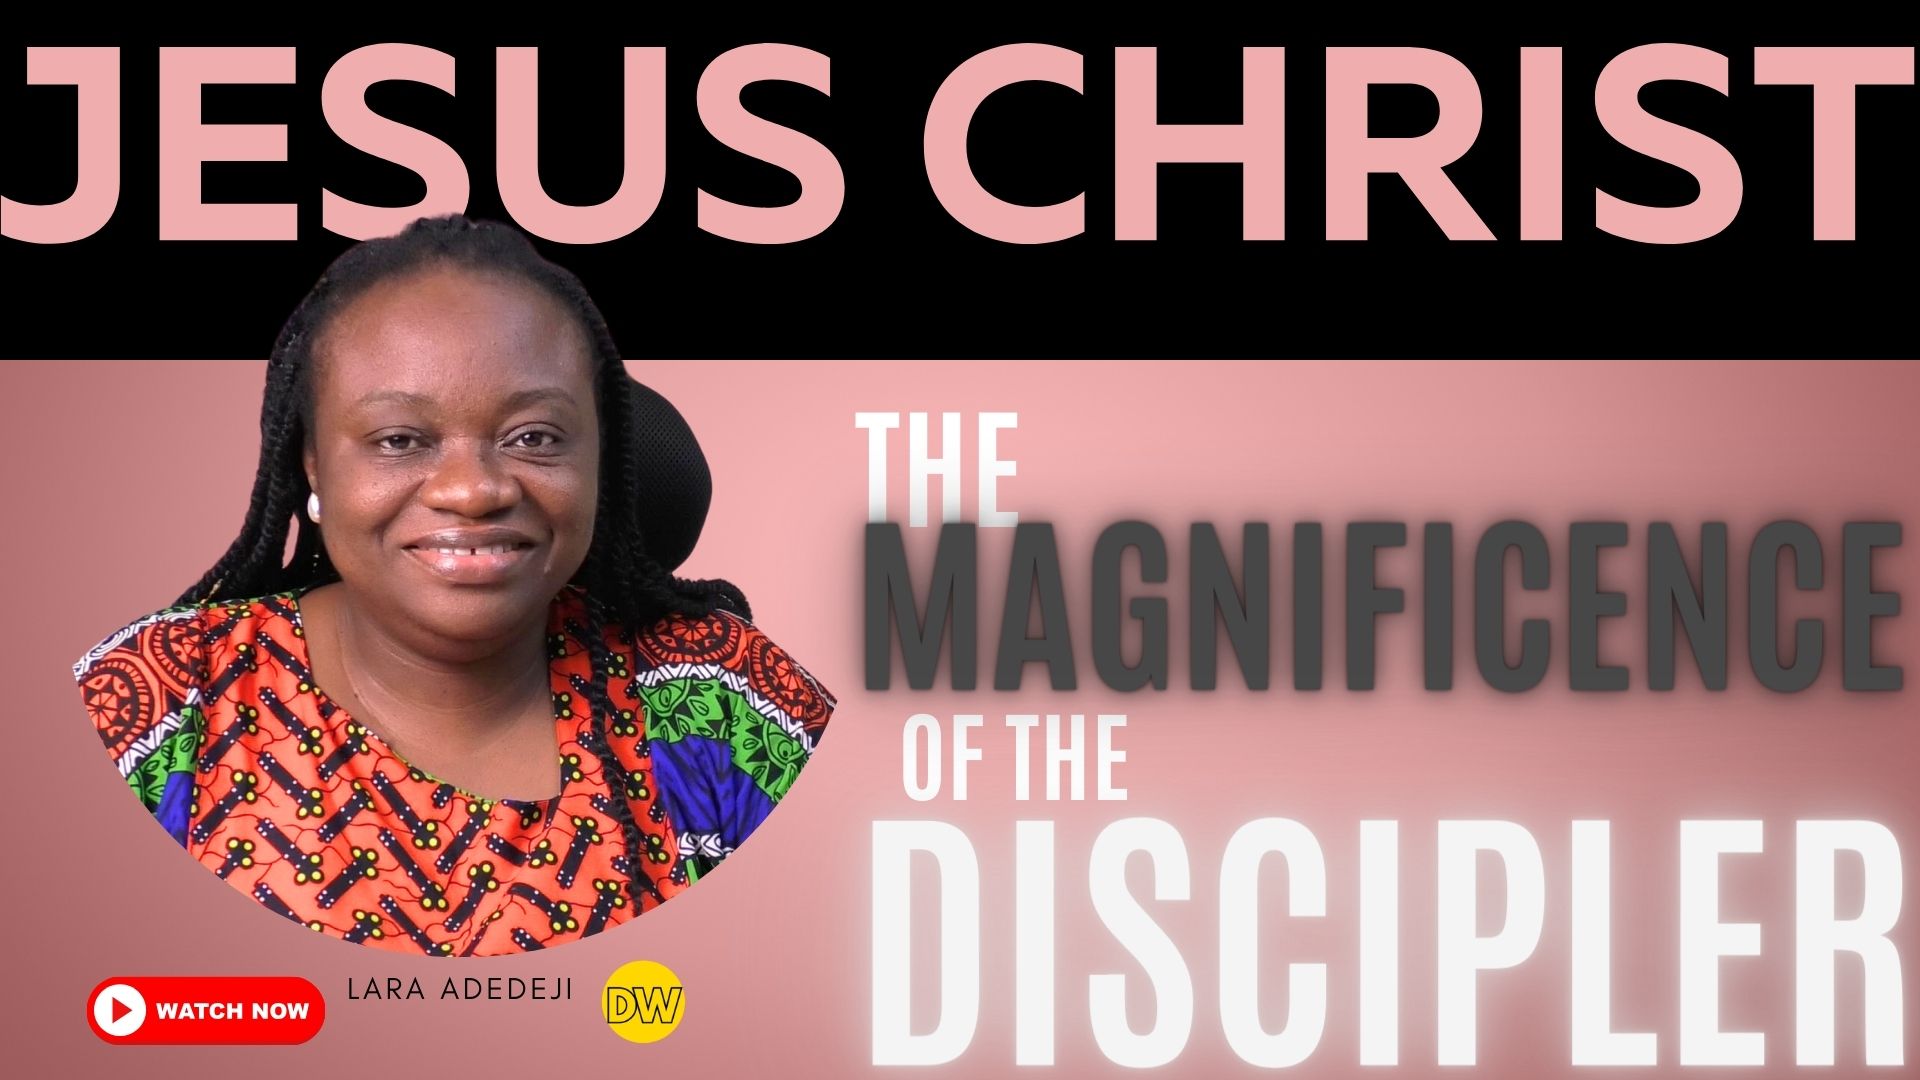 Jesus Christ: The MAGNIFICENCE of The Discipler